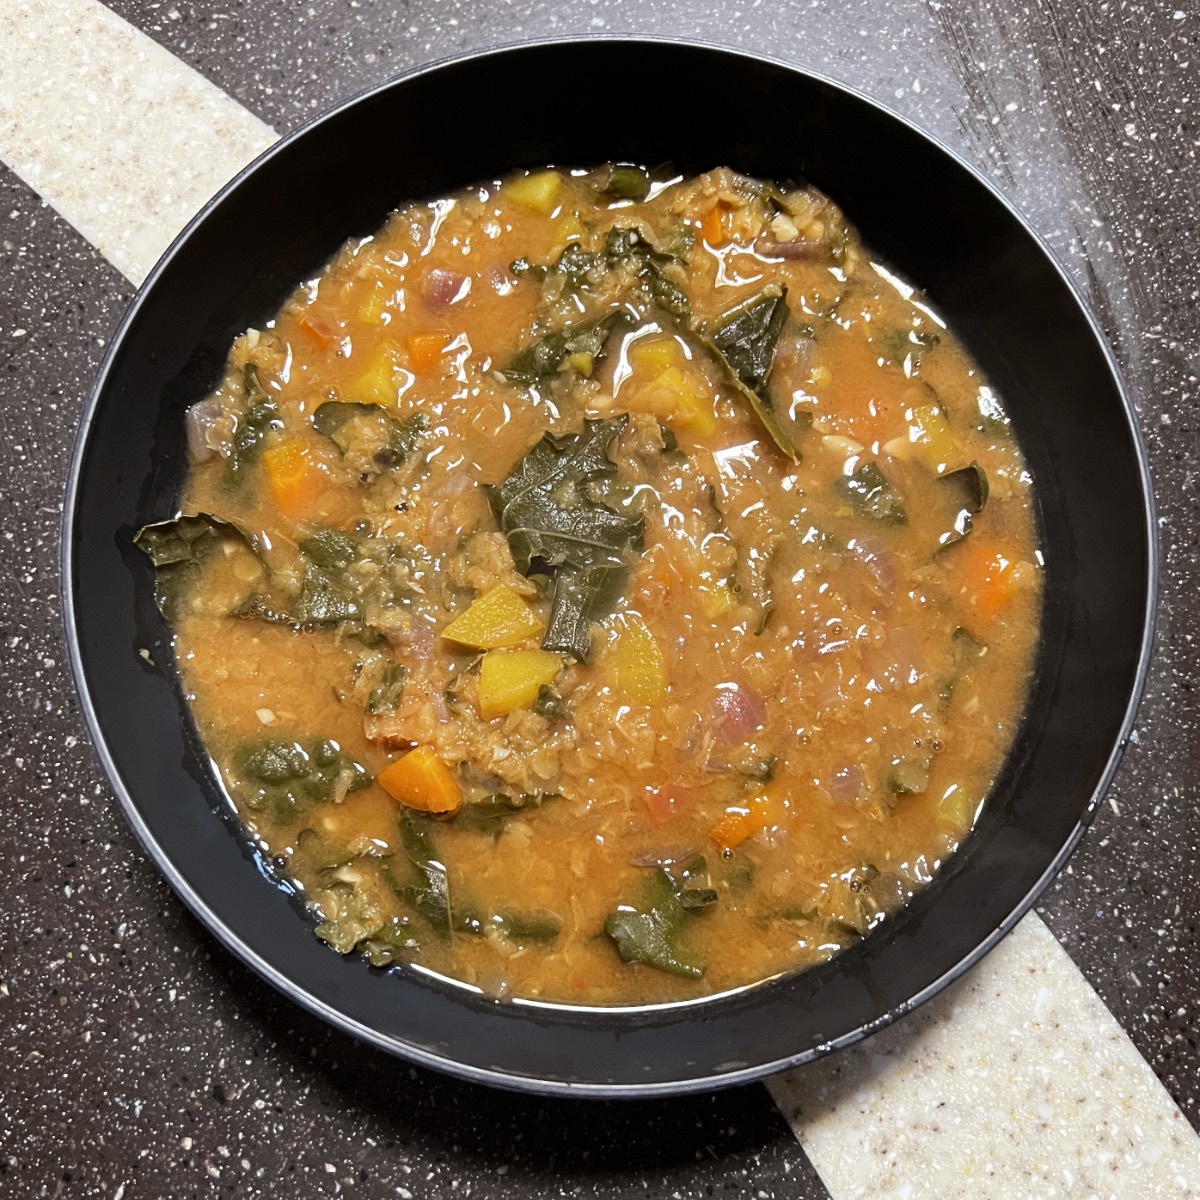 a black bowl containing red lentil soup with kale.